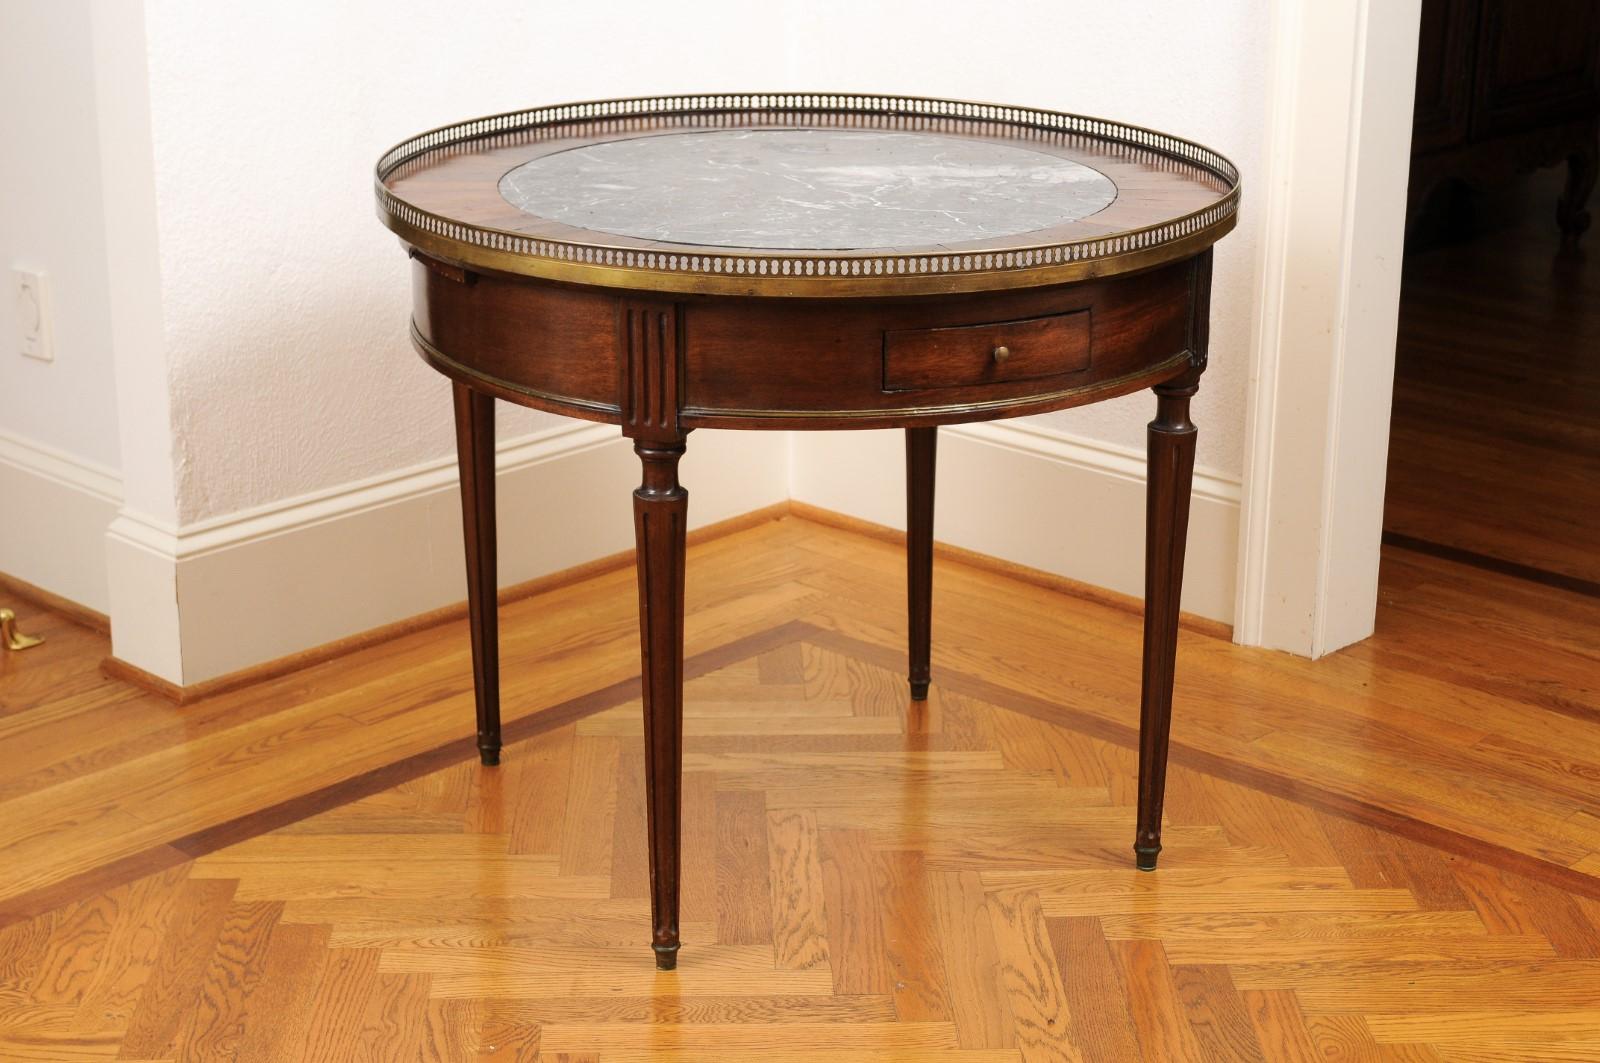 Napoleon III French Napoléon III Period 1850s Bouillotte Table with Marble Top and Gallery